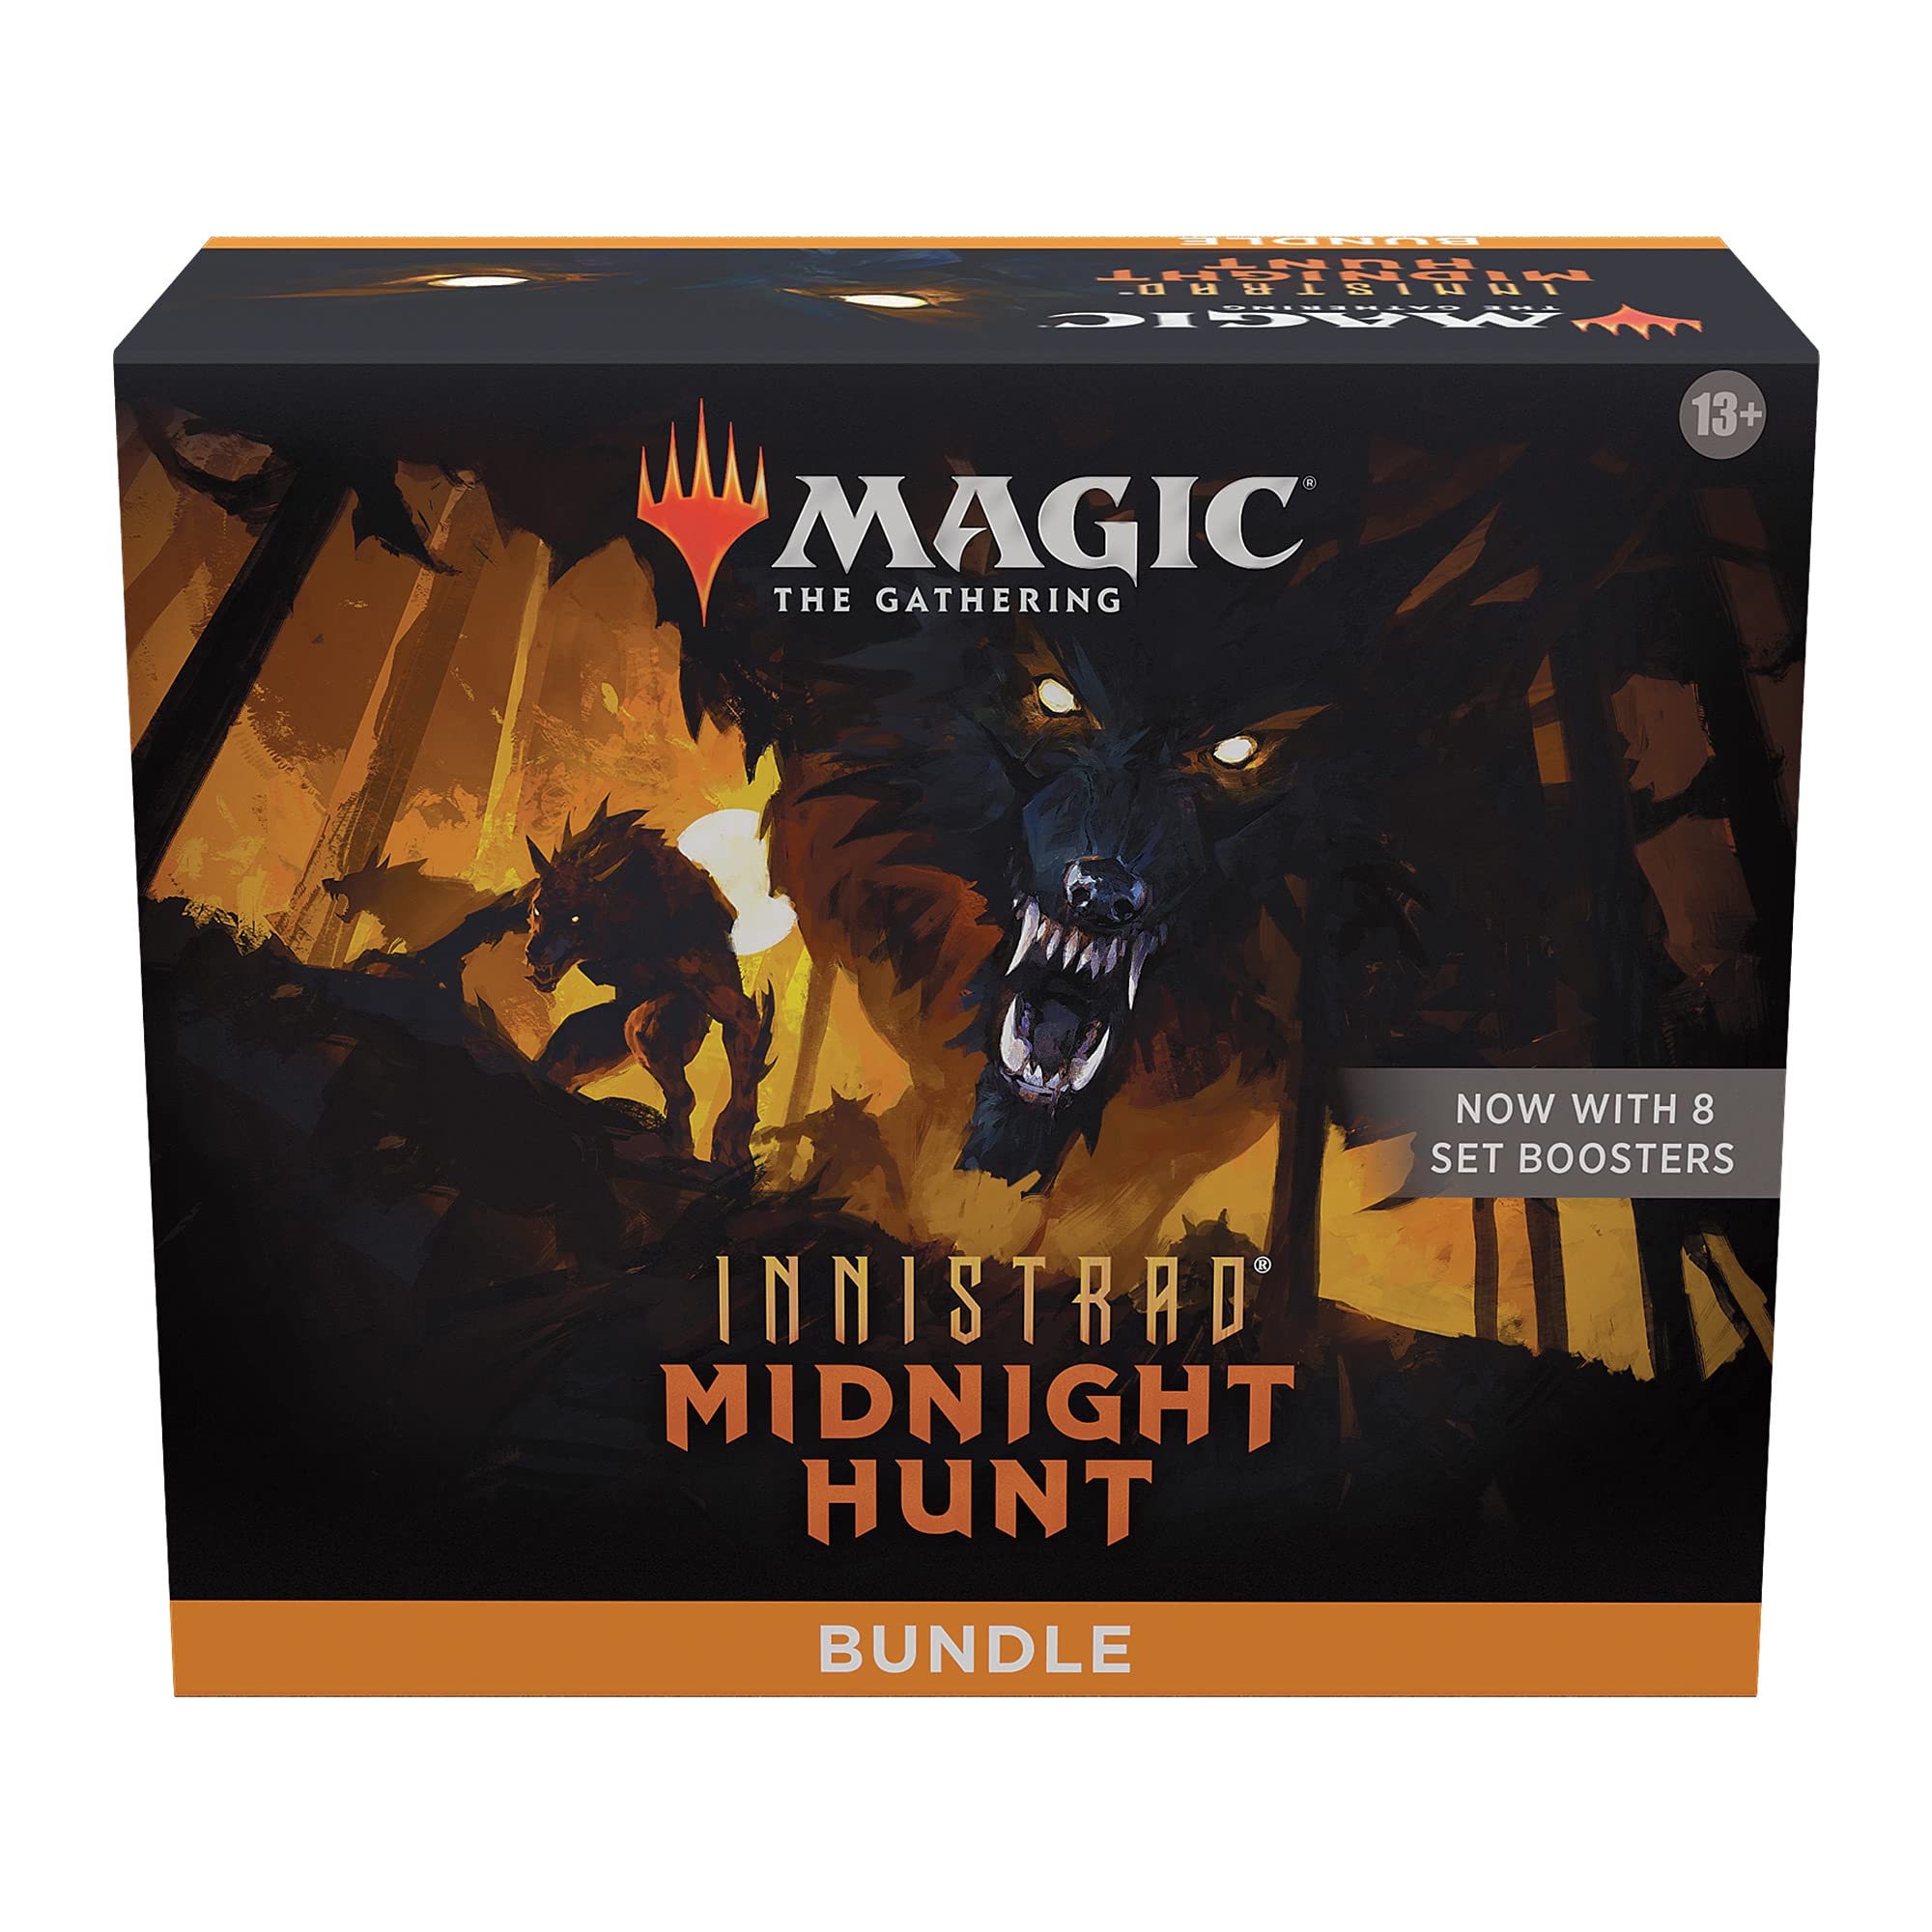 Magic The Gathering Innistrad: Midnight Hunt Bundle | 8 Set Boosters + Accessories